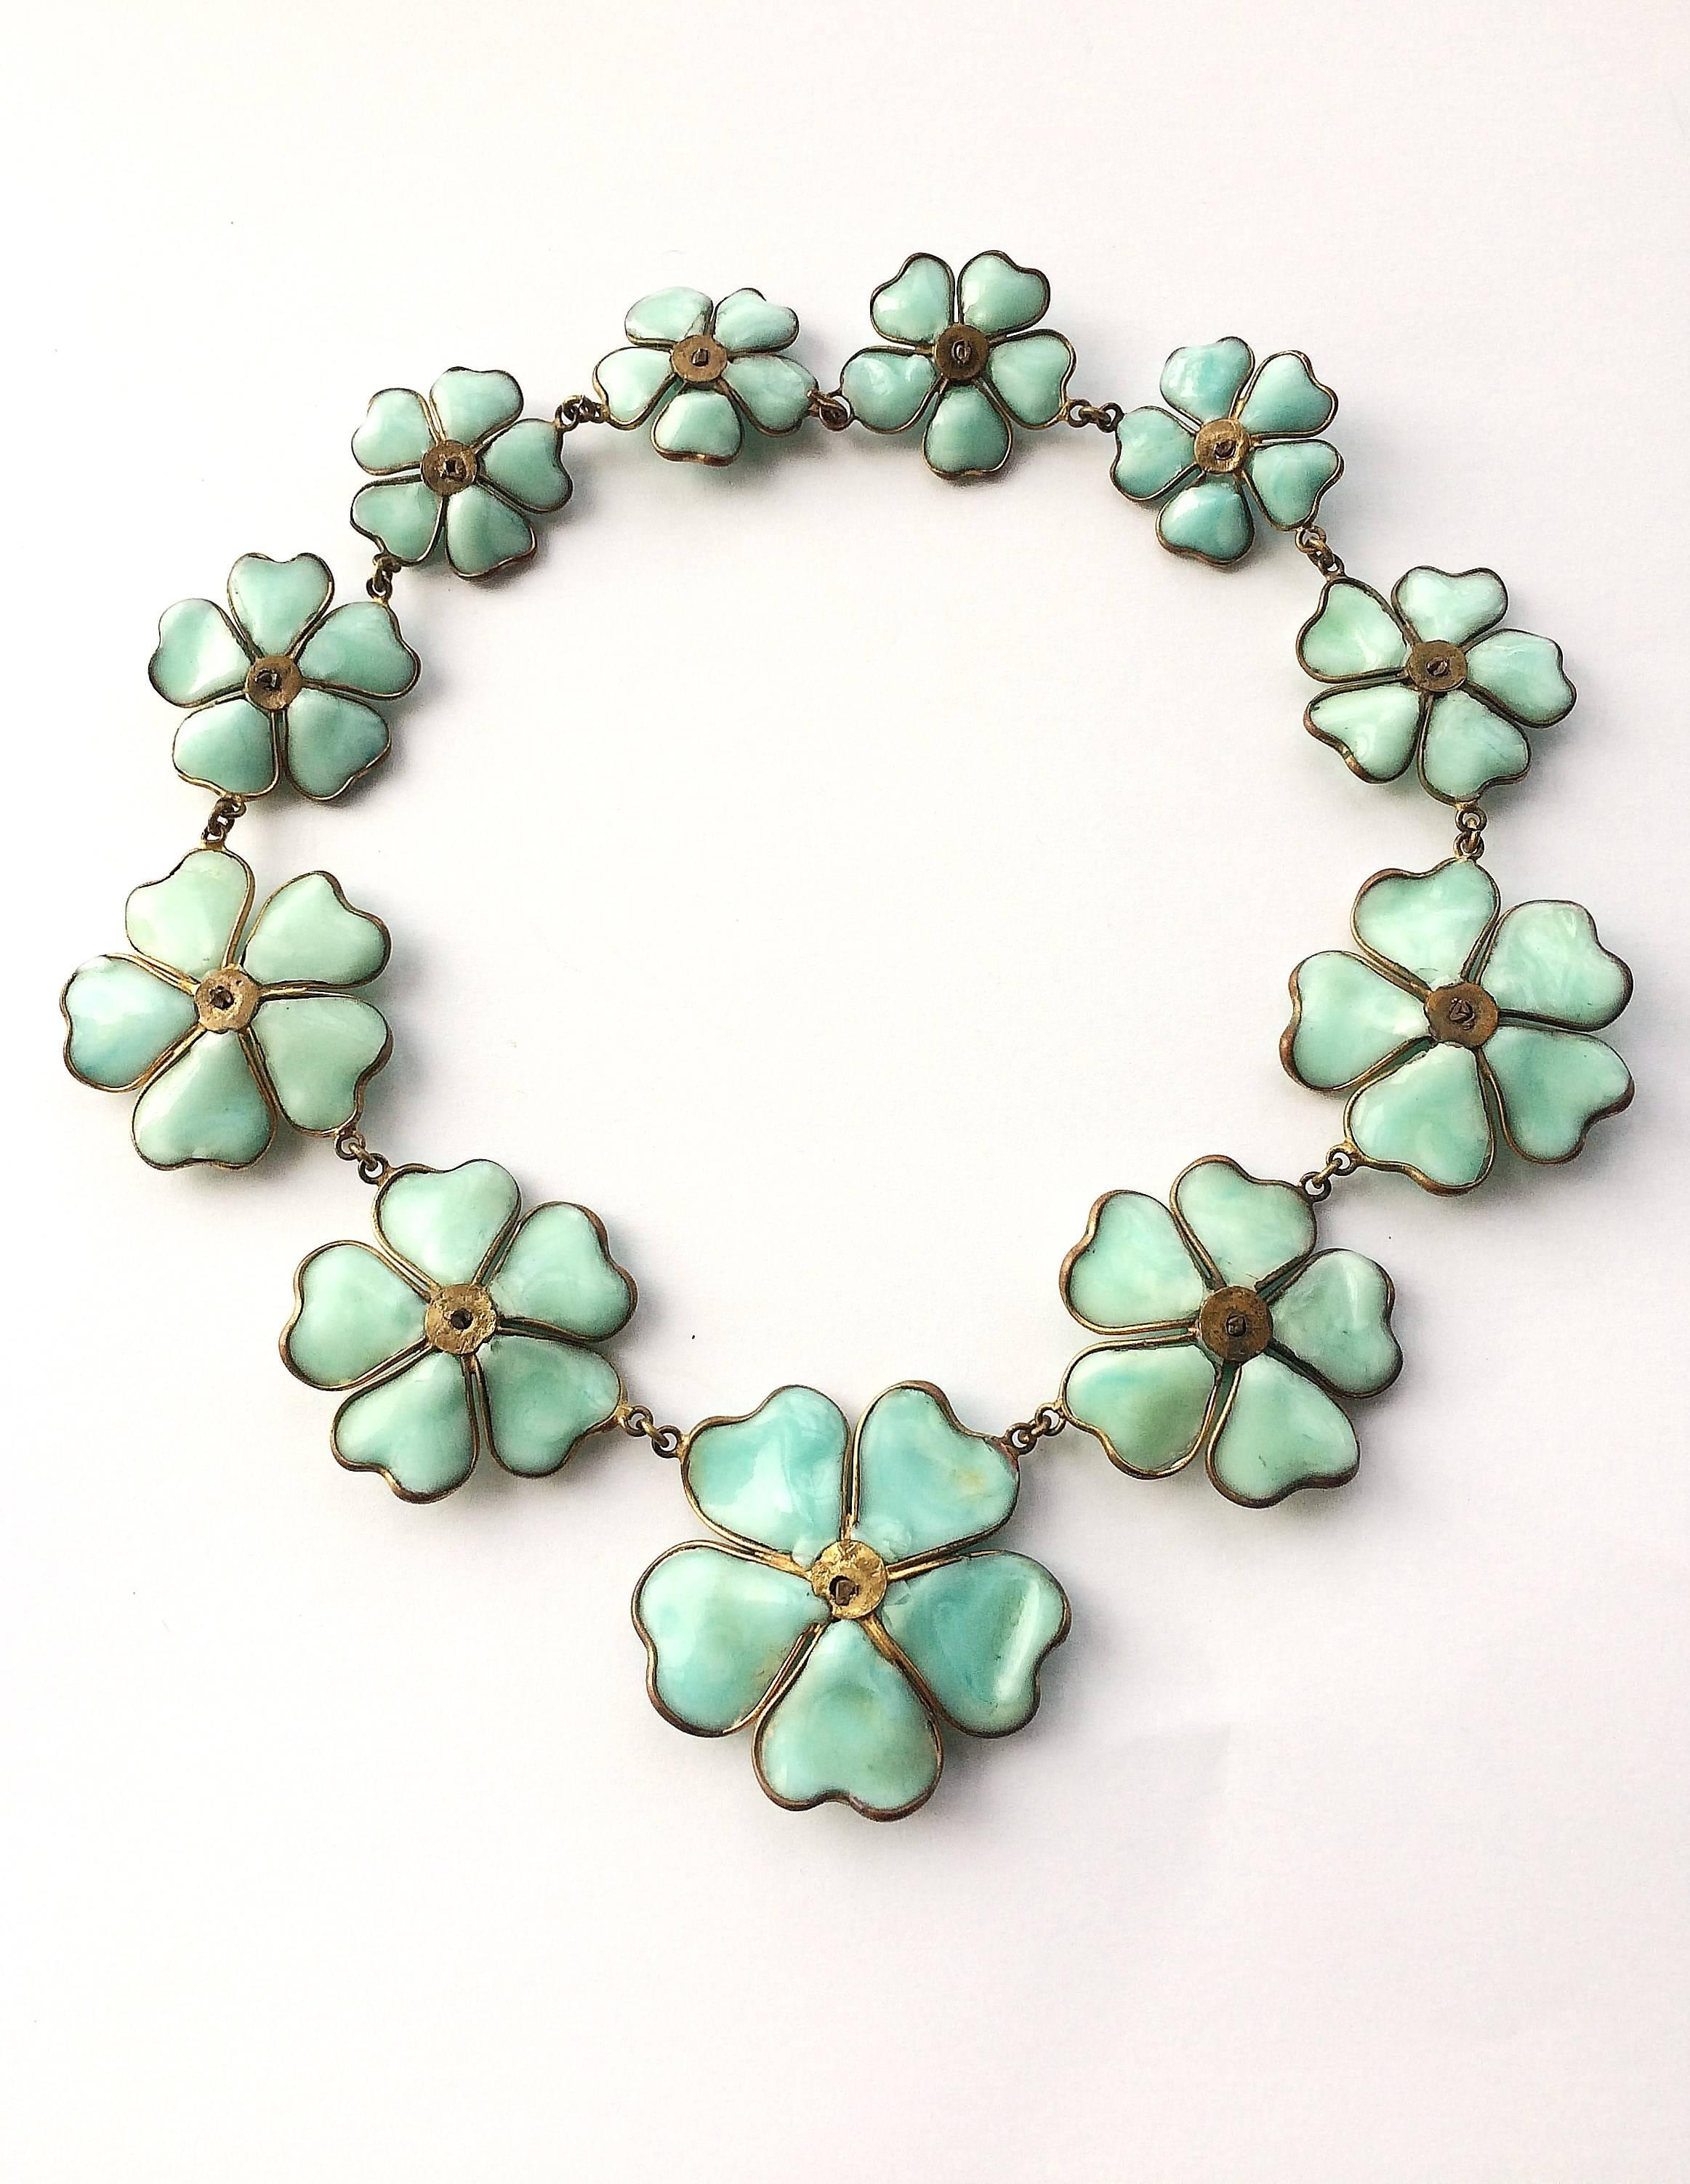 Perhaps the most well known and iconic Chanel necklace, this is handmade in the 1930s from gilt metal and poured glass by Maison Gripoix. The metalwork and glass are of a much finer workmanship than is seen today. This necklace came in a variety of